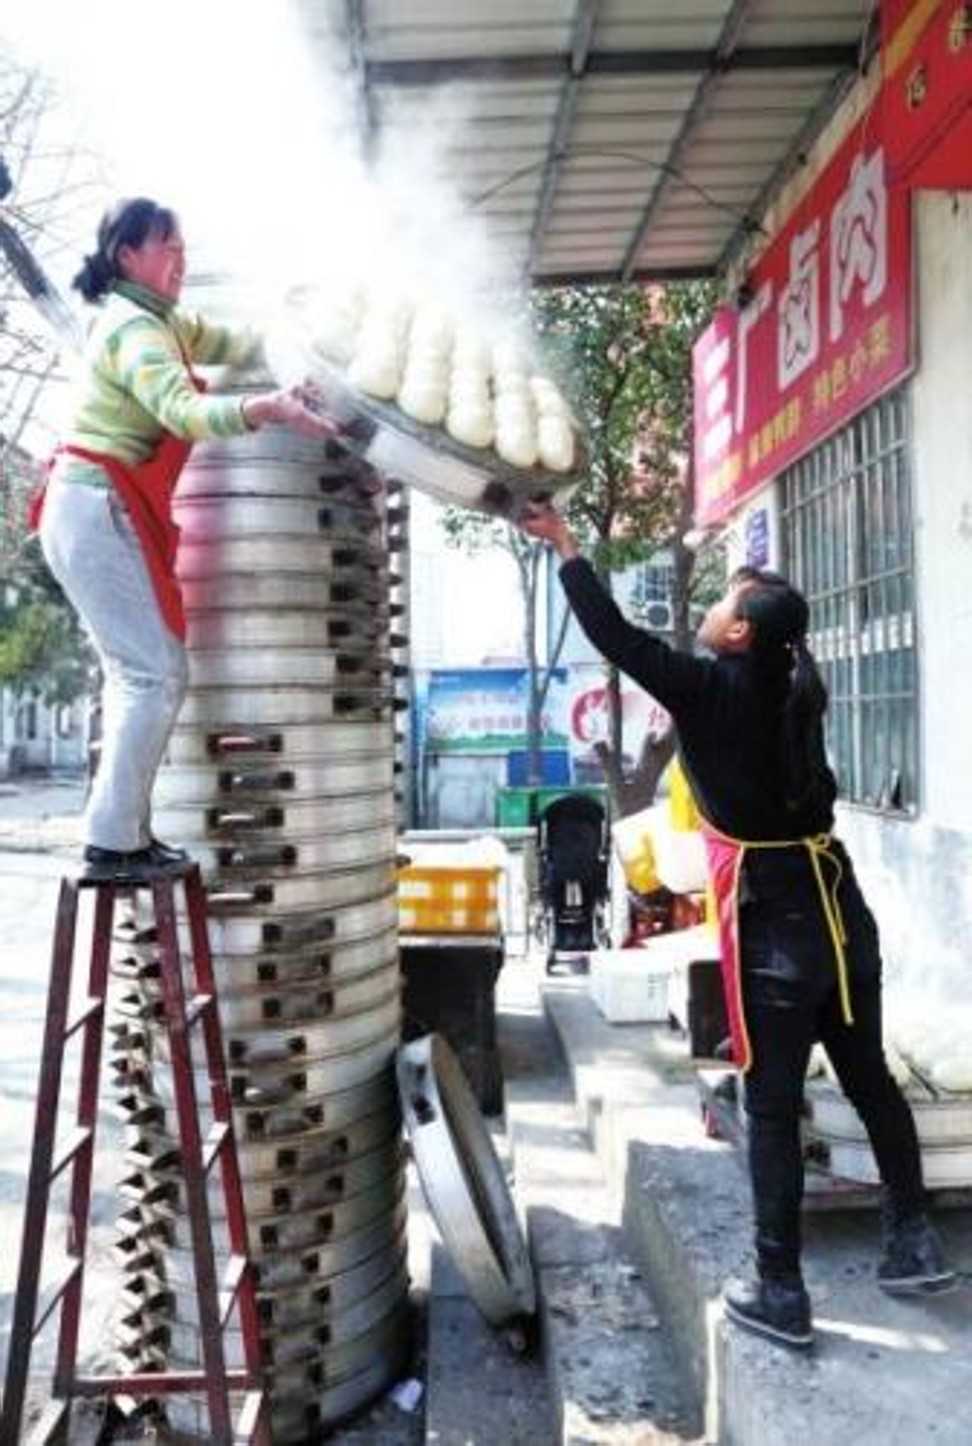 The business sells up to 10,000 buns a day. Photo: People.cn